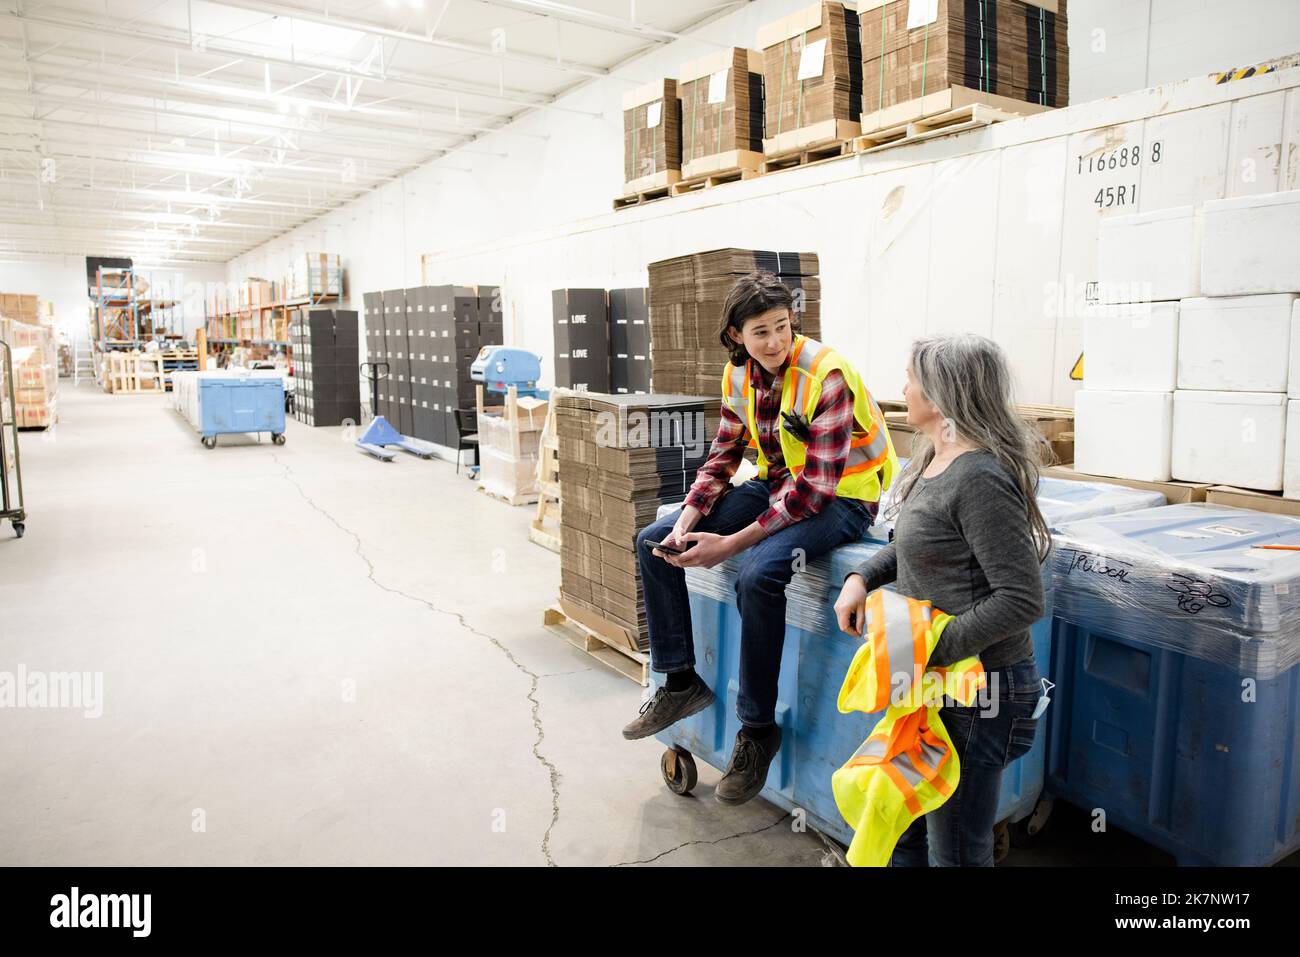 Warehouse workers with reflective vests talking Stock Photo